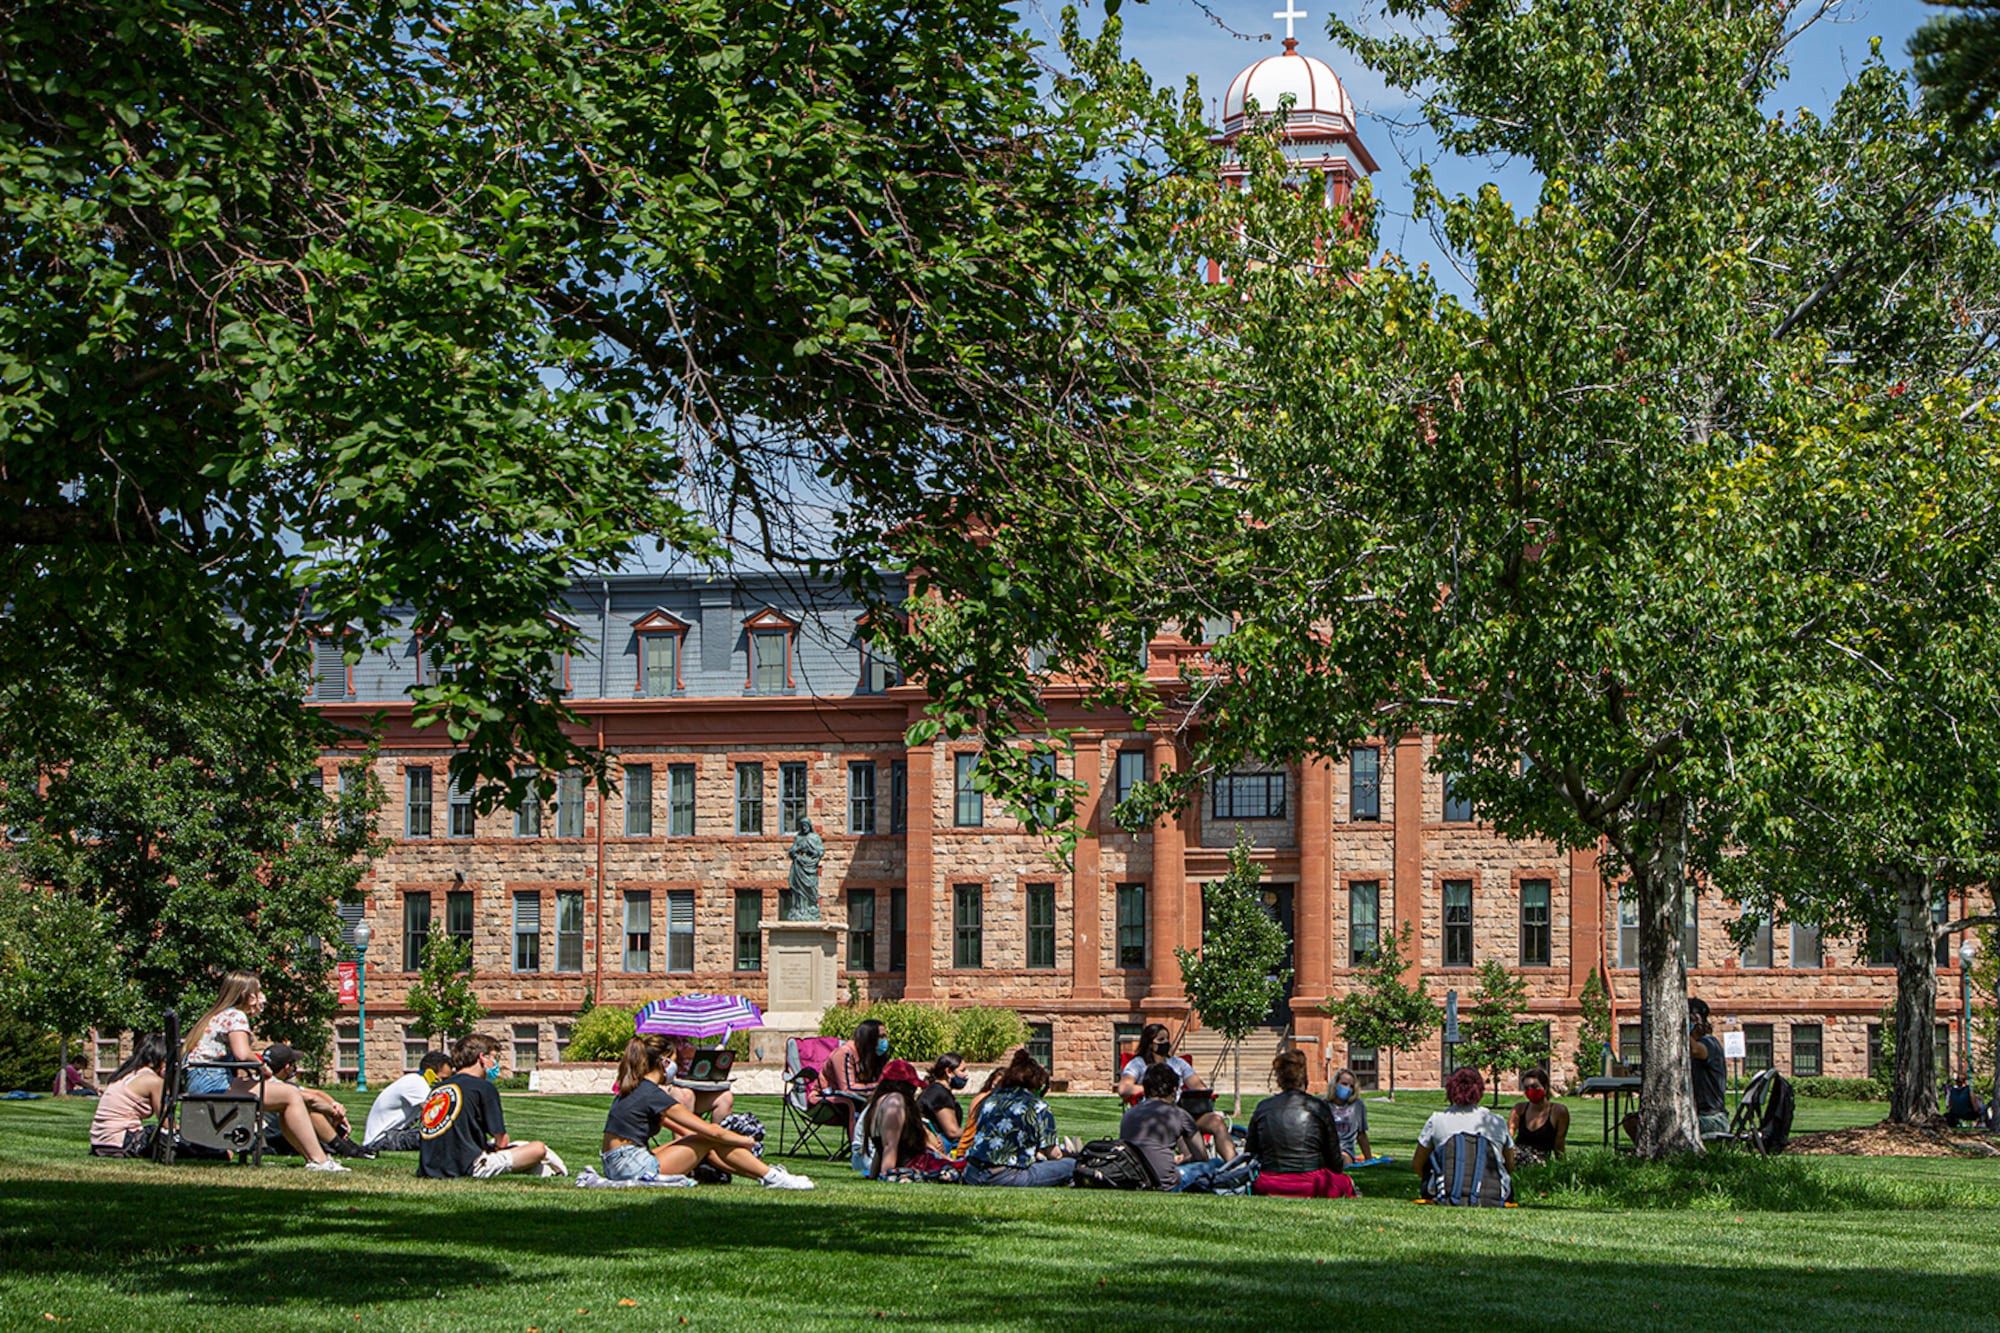 Regis University students gather outside for class during the first week of the 2020 fall semester.